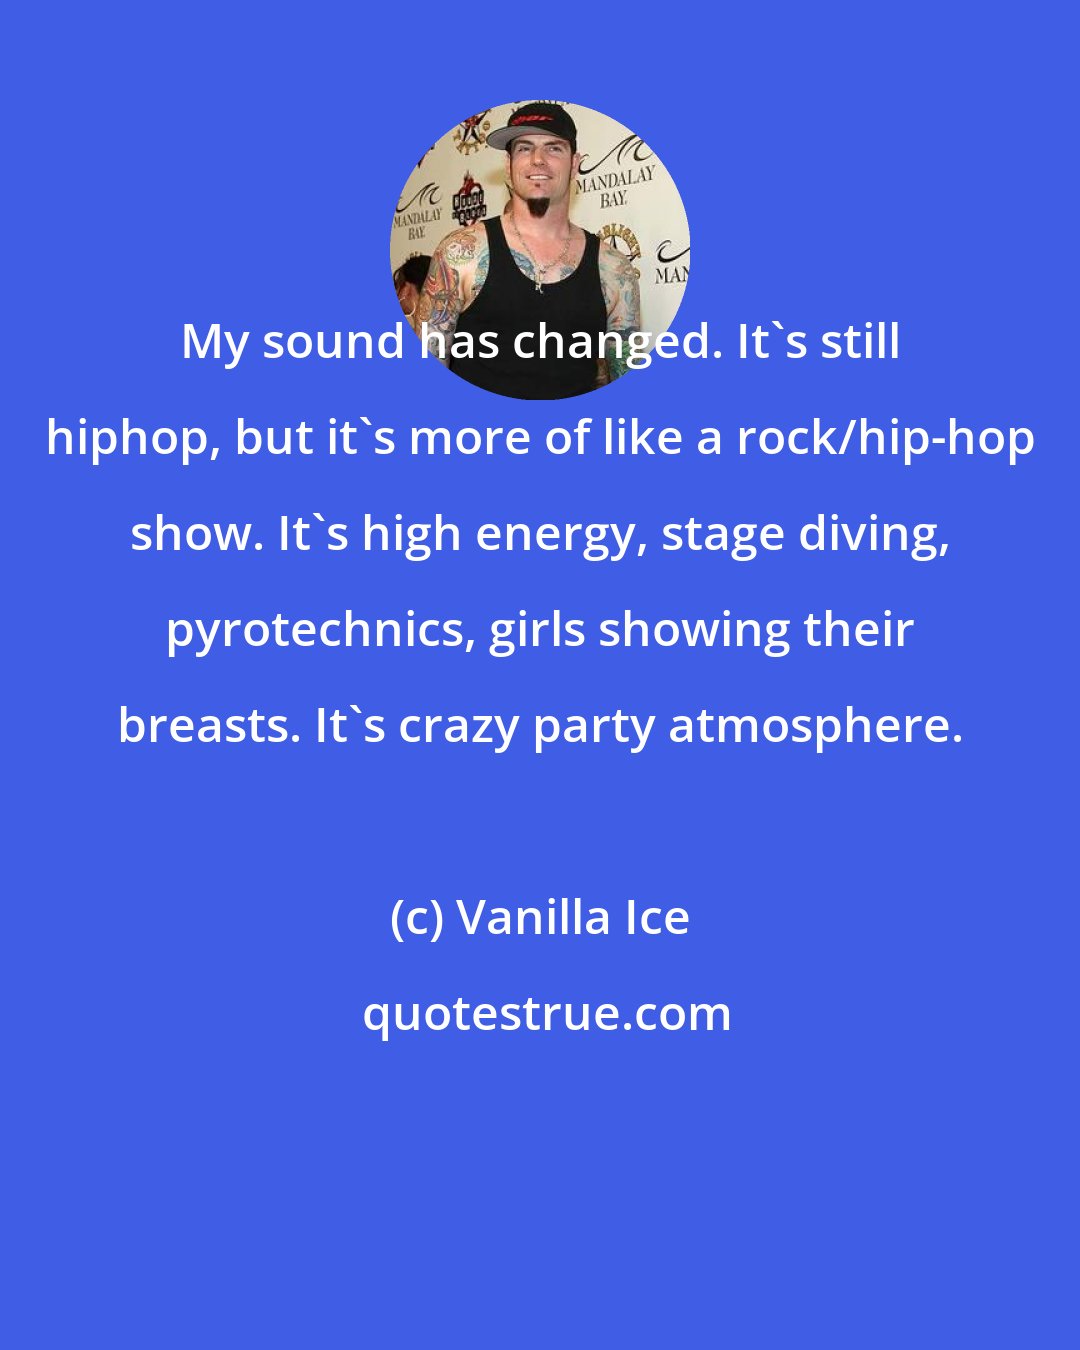 Vanilla Ice: My sound has changed. It's still hiphop, but it's more of like a rock/hip-hop show. It's high energy, stage diving, pyrotechnics, girls showing their breasts. It's crazy party atmosphere.